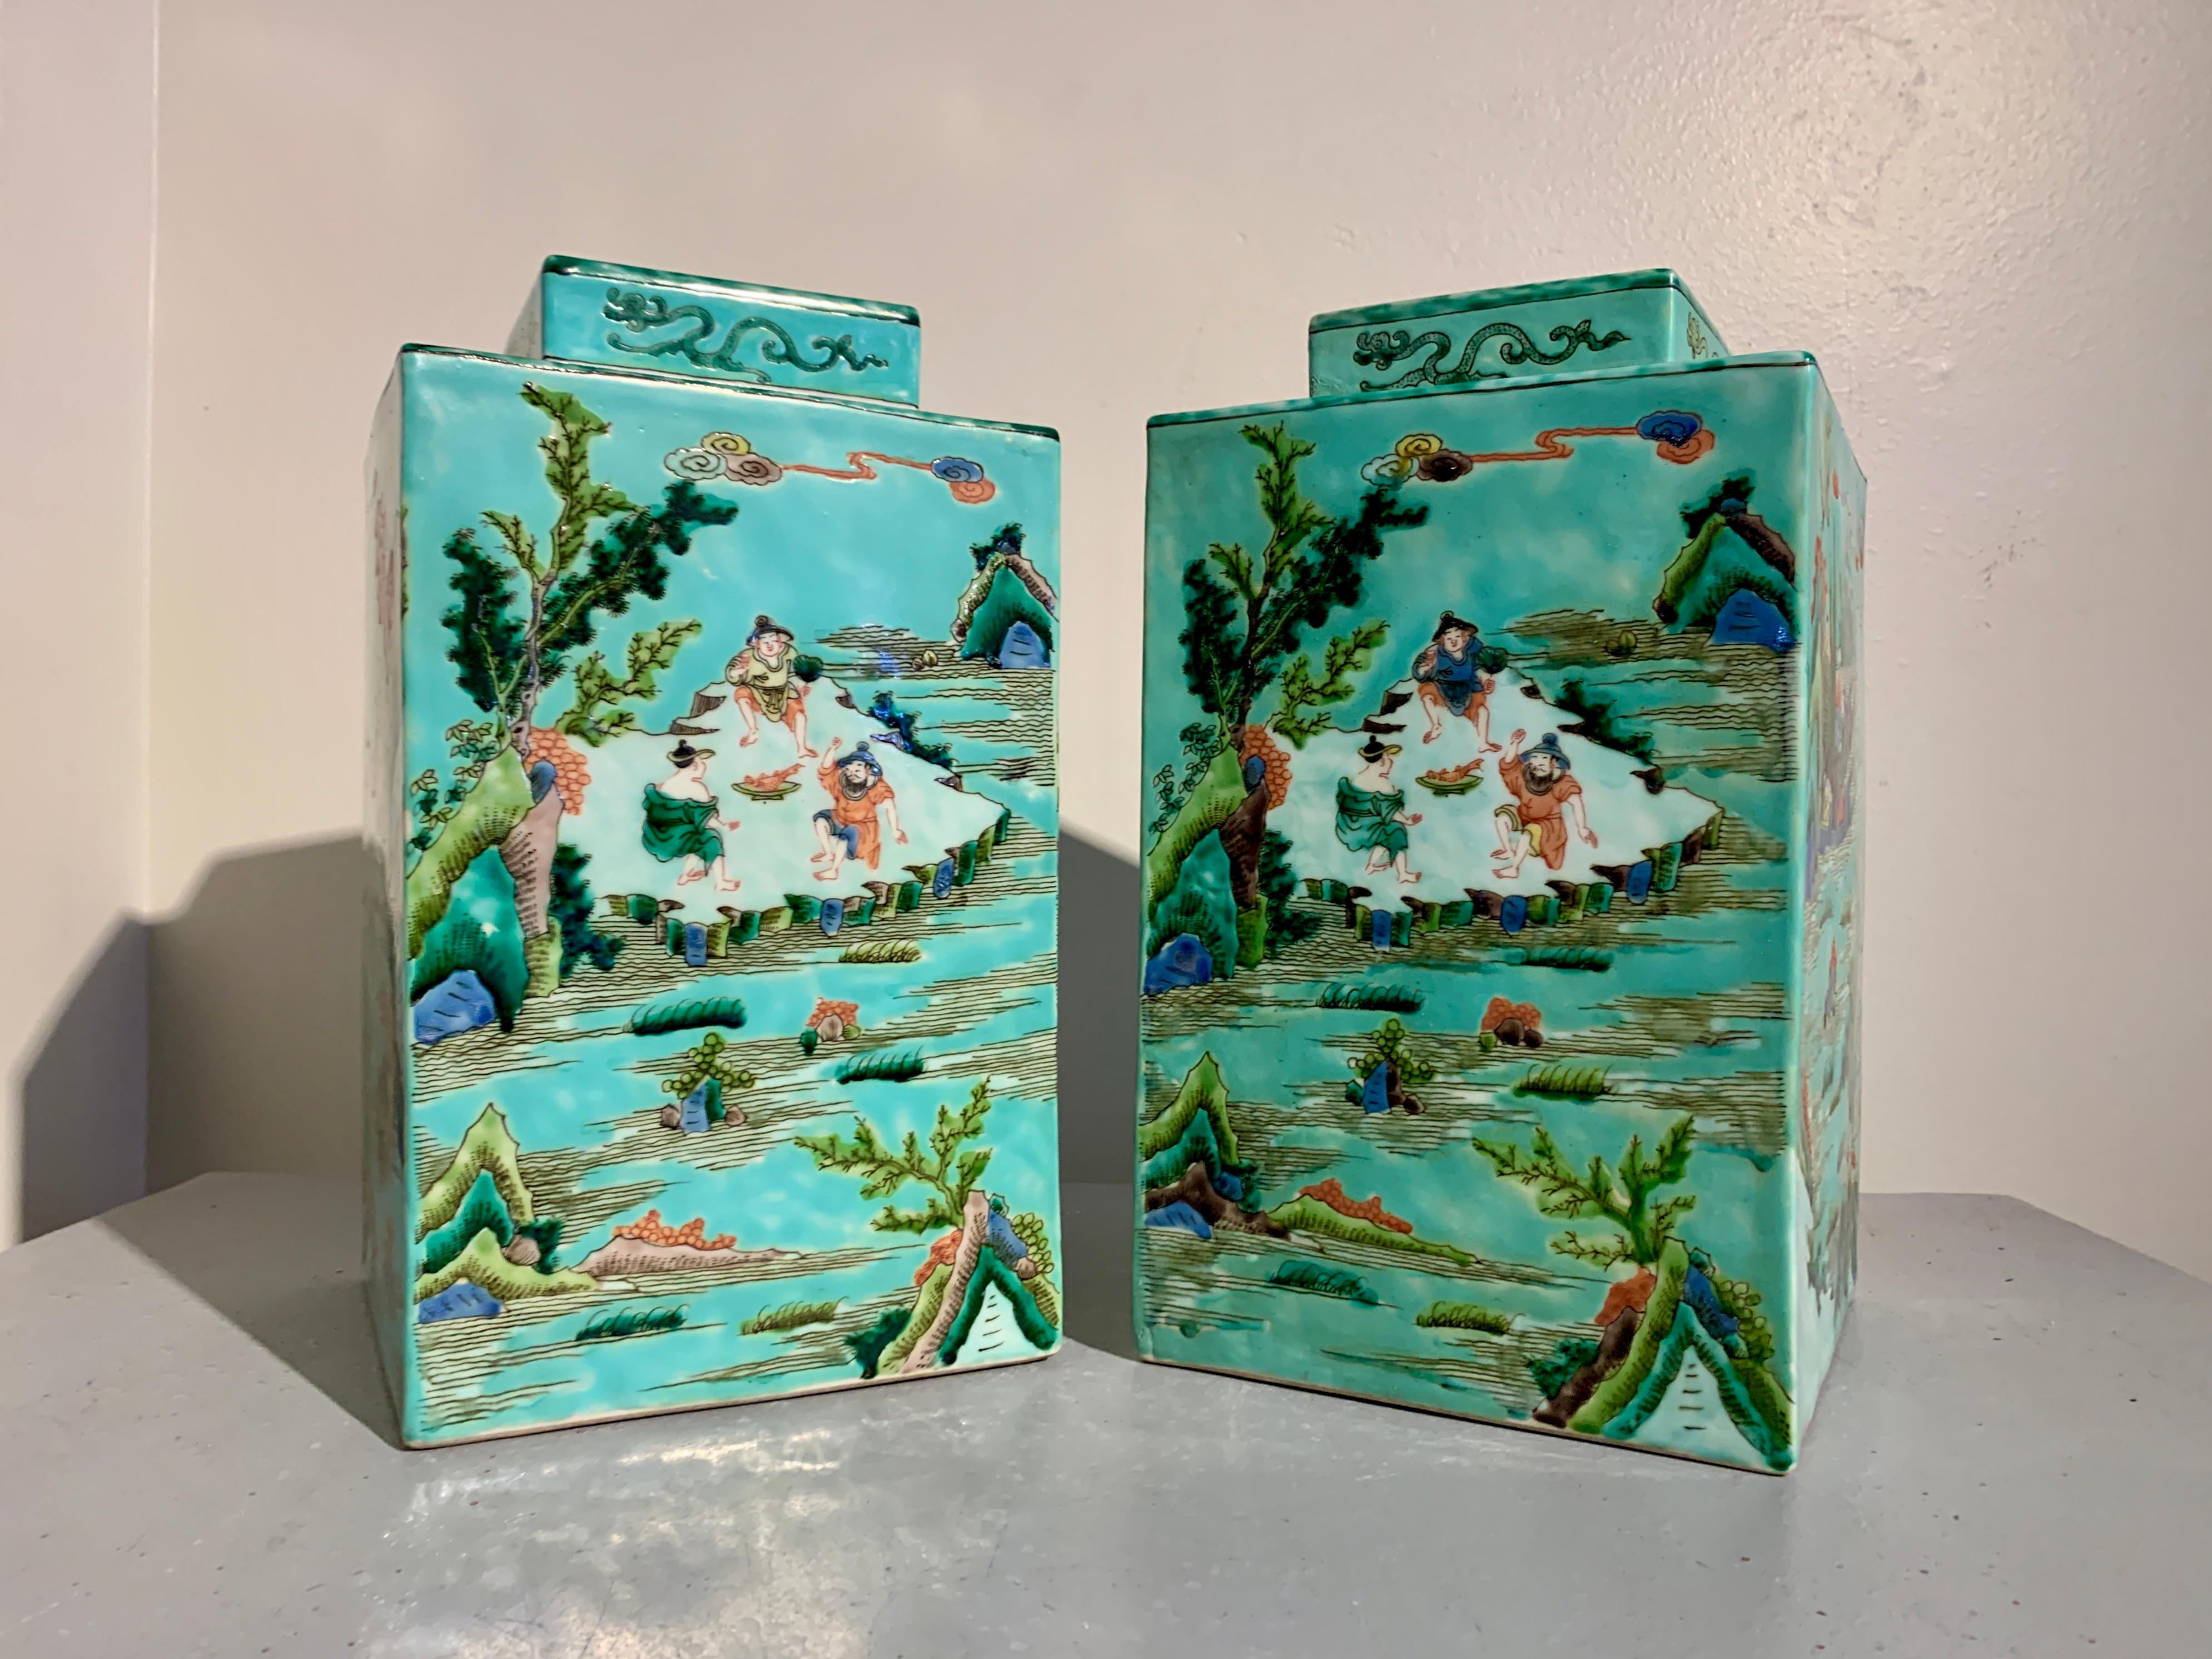 An attractive and highly decorative pair of large Chinese famille verte style enameled porcelain tea caddies and covers, with apocryphal Kangxi reign marks, early to mid 20th century, China.

The large porcelain tea caddies decorated on all sides